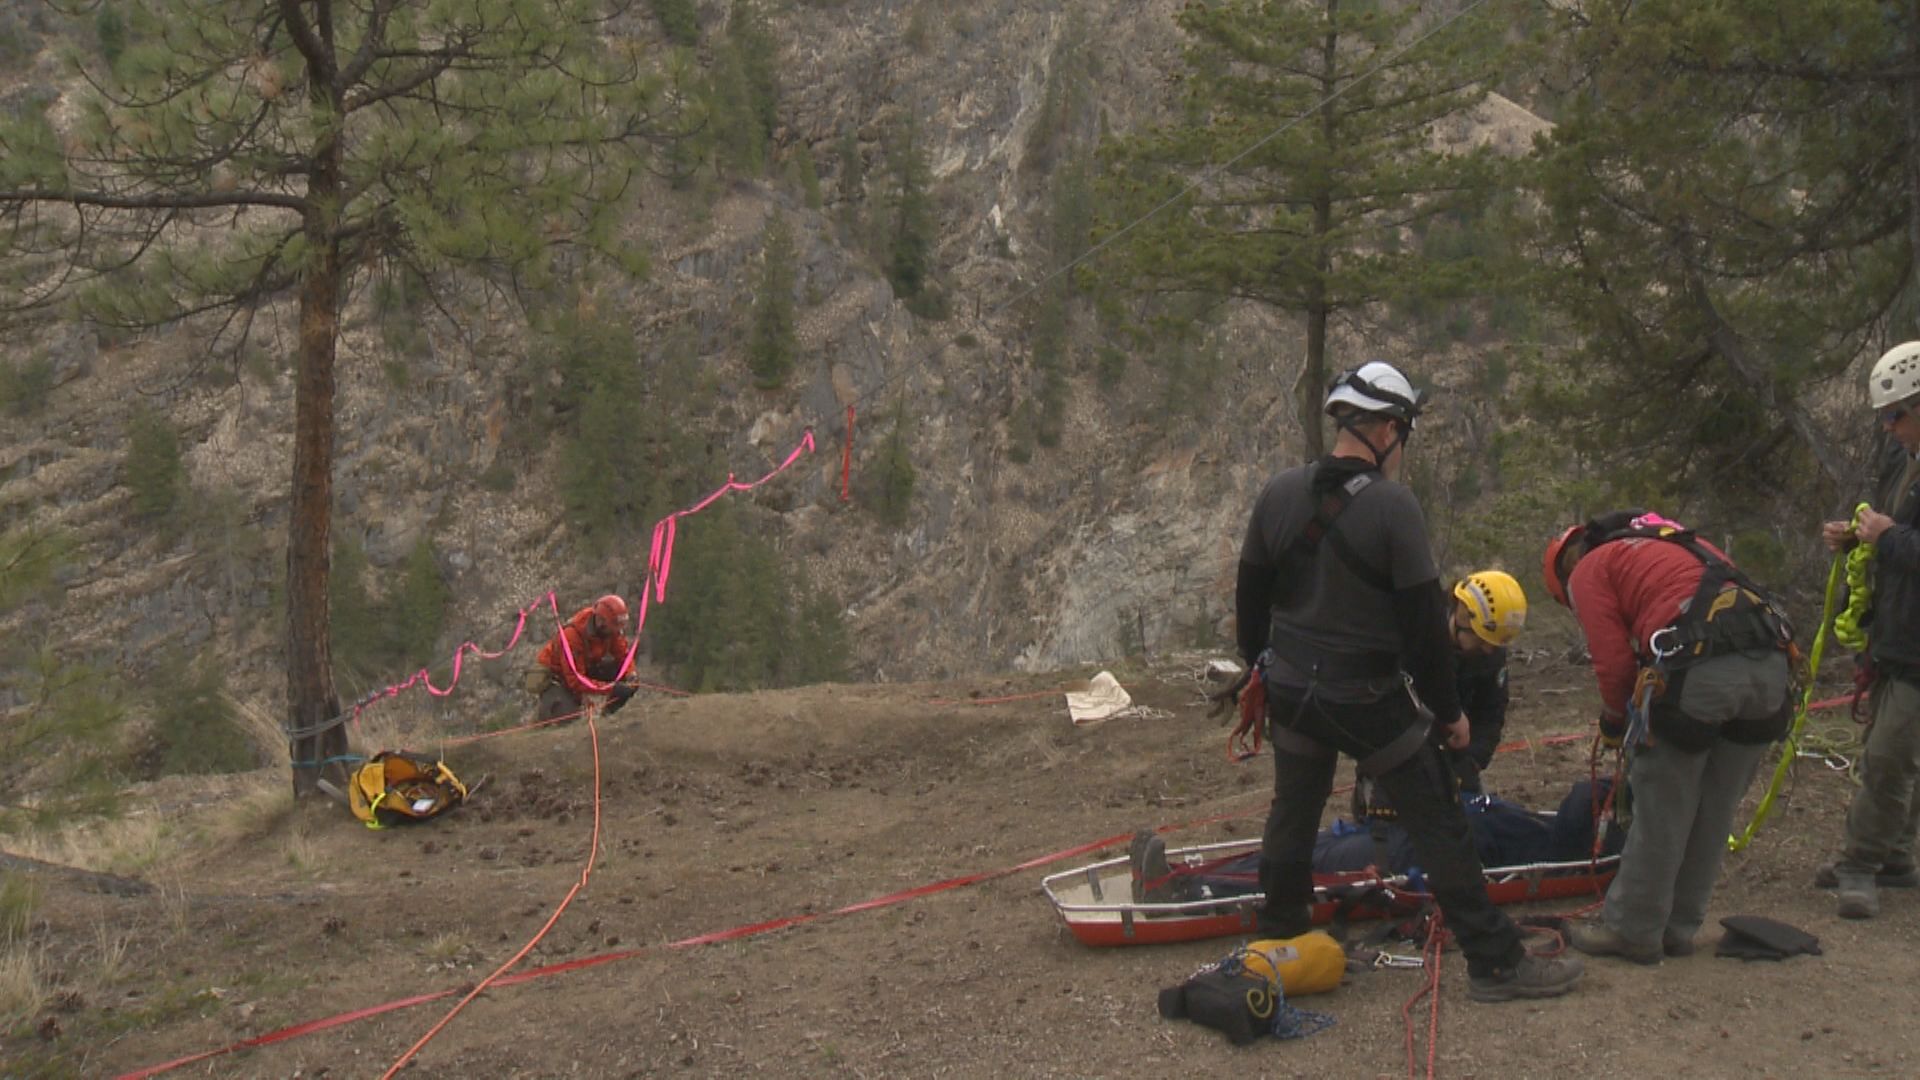 B.C. search and rescue volunteers take part in rope rescue